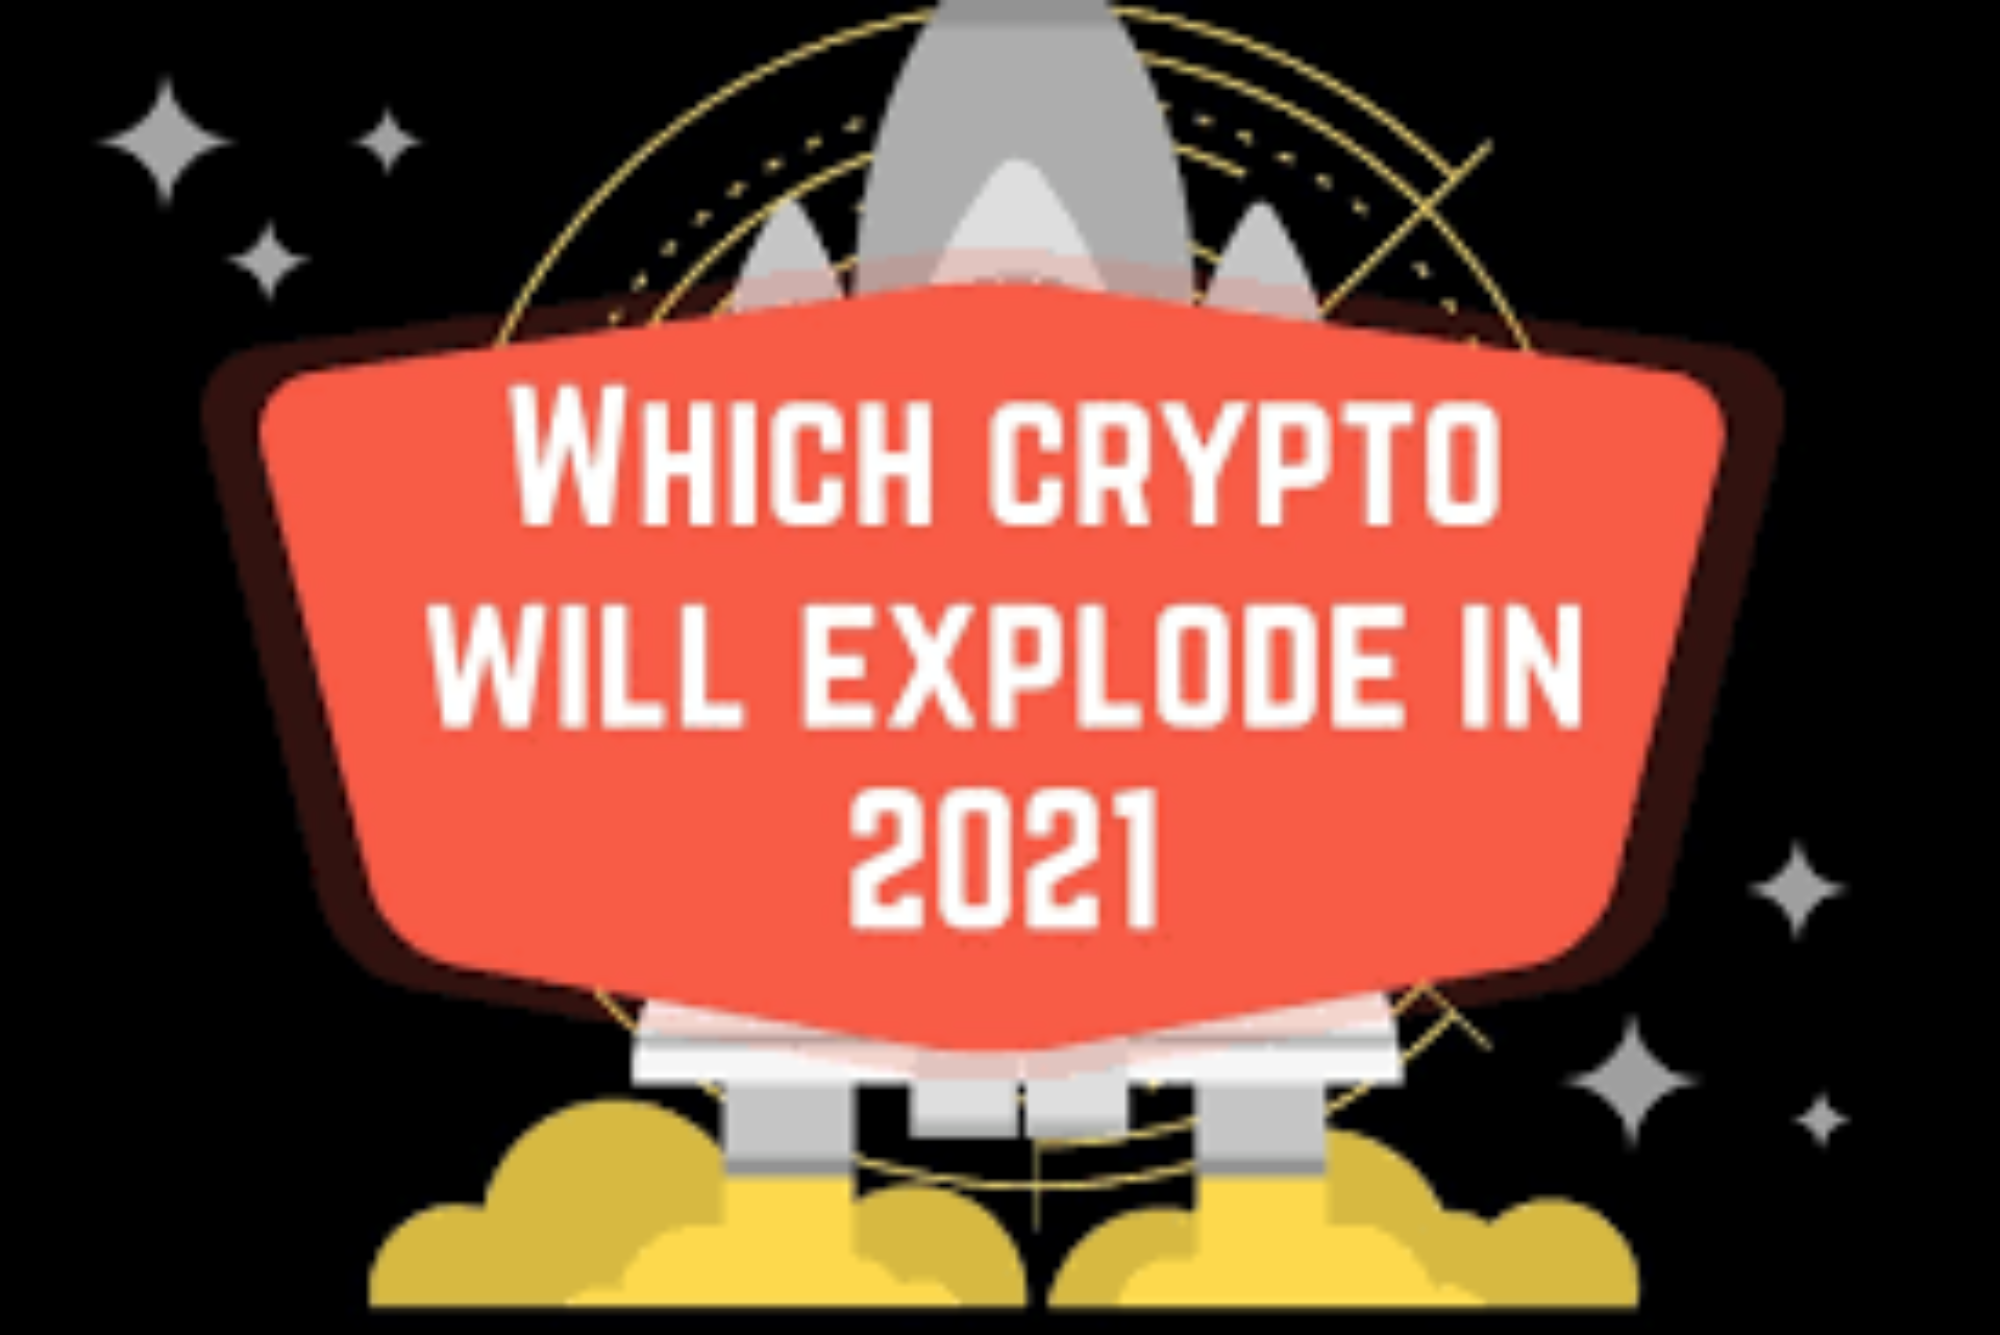 which cryptocurrency will explode in 2021